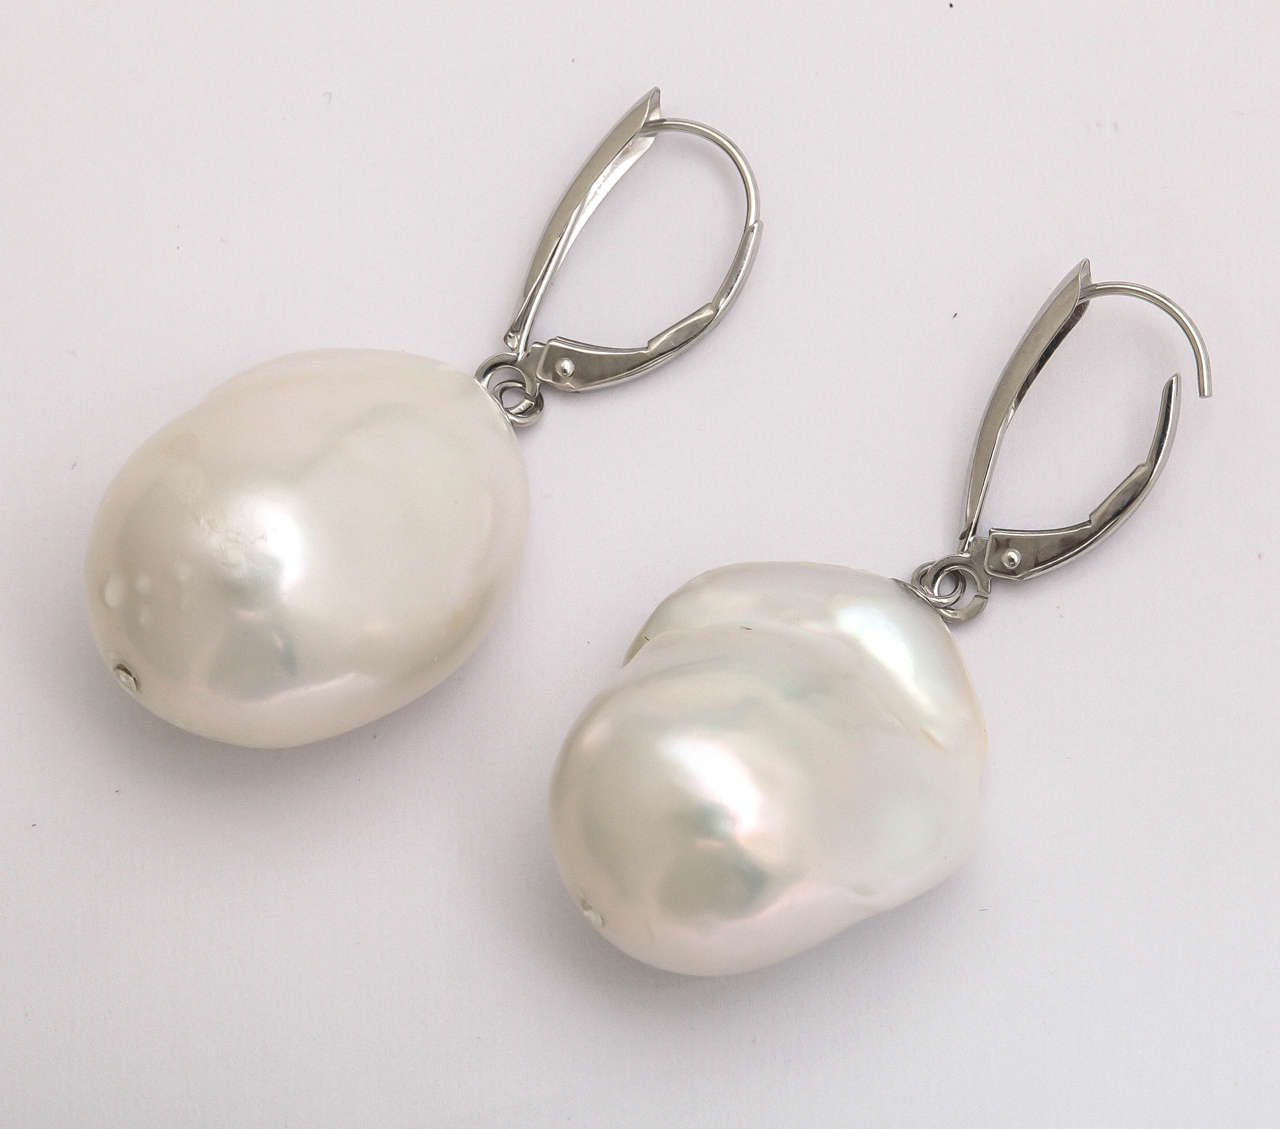 Top quality fresh water baroque pearls dangle gracefully from 14 kt white gold eurowires. The gold section is 3/4 in. long and the total length of the earrings is 1 3/4 in. long. The wonderful lusture is very complimentary next to a woman's skin and